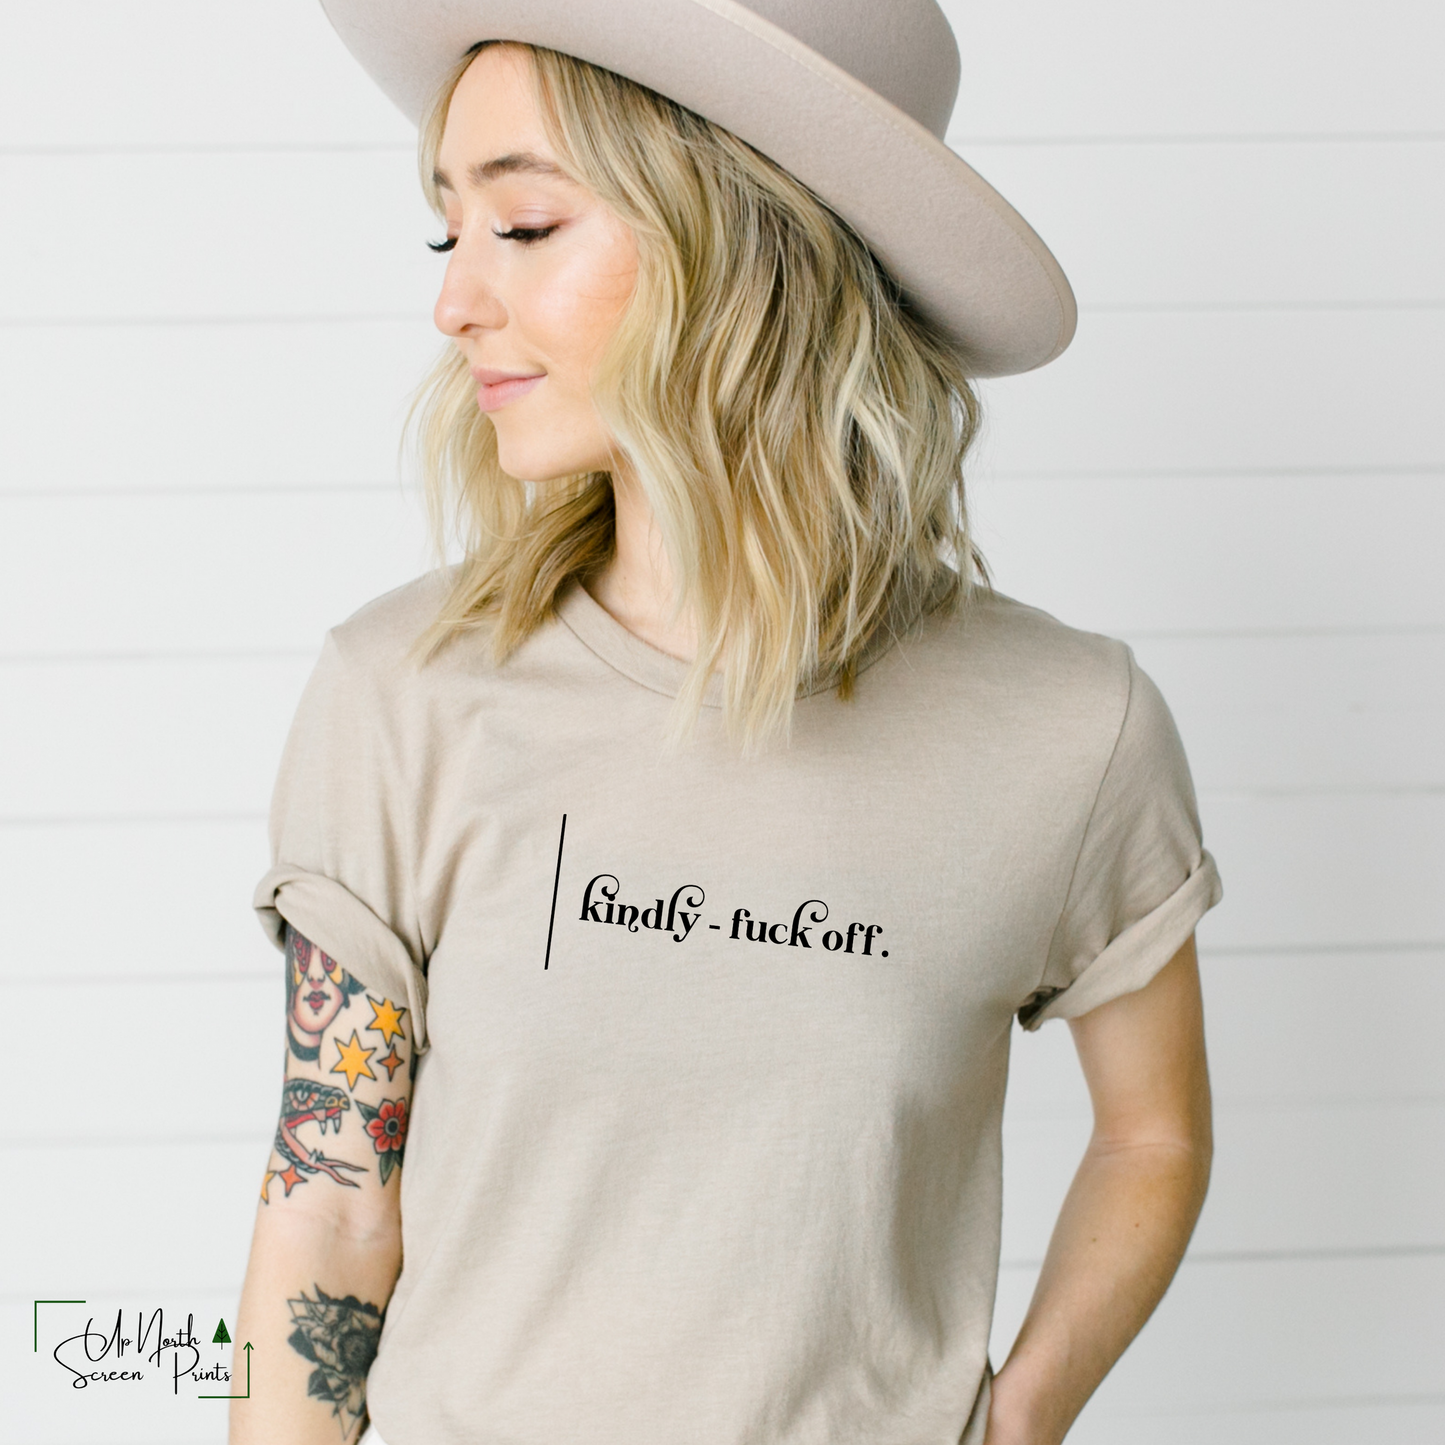 KINDLY FUCK OFF T-SHIRT TANK OR SWEATER